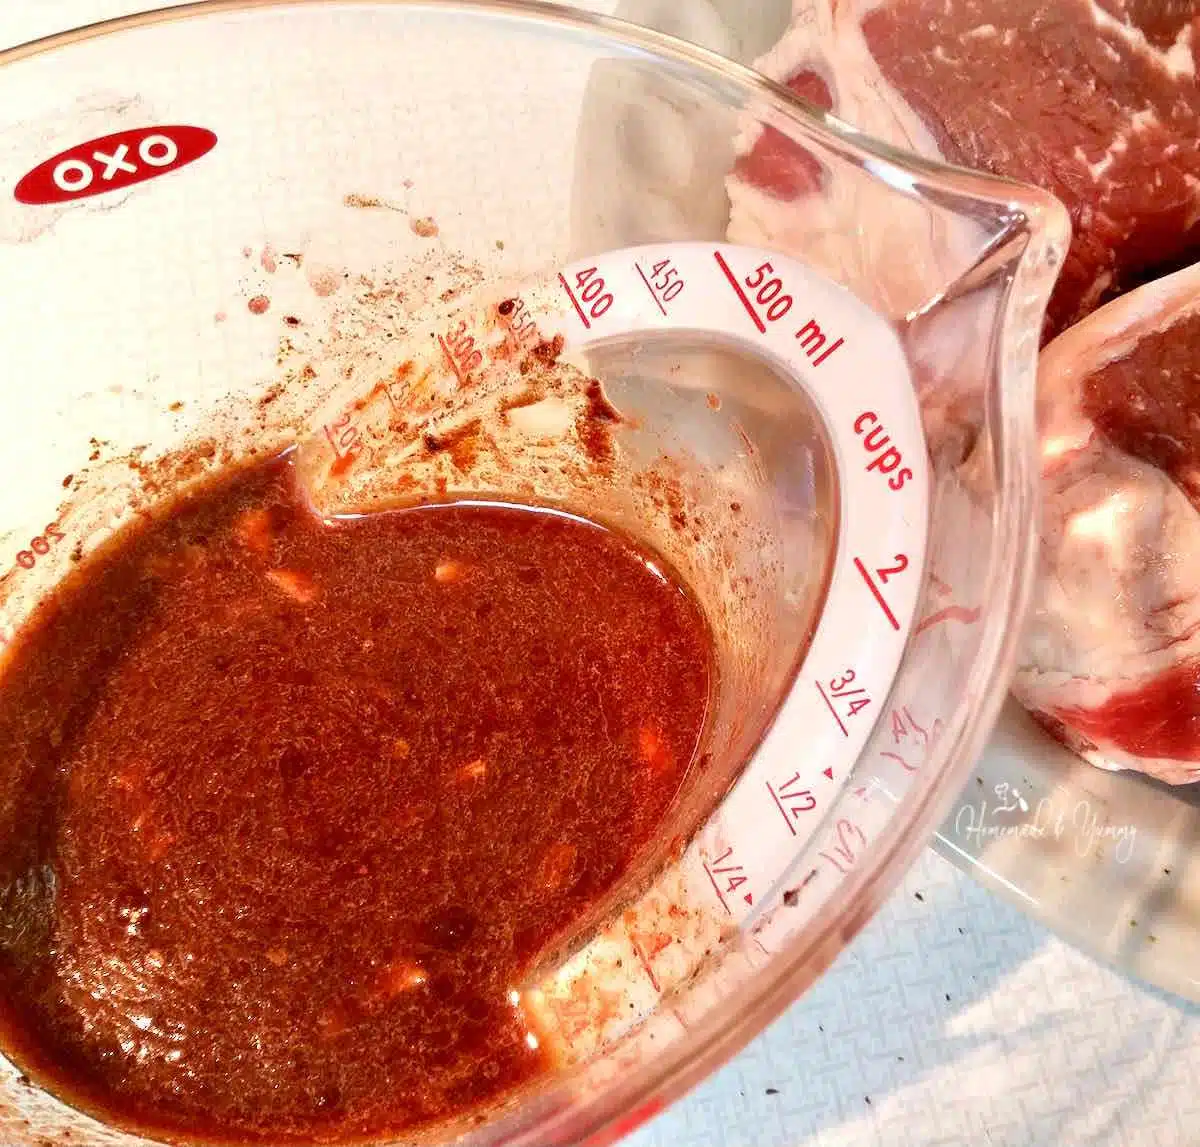 All the marinade ingredients in a measuring cup.